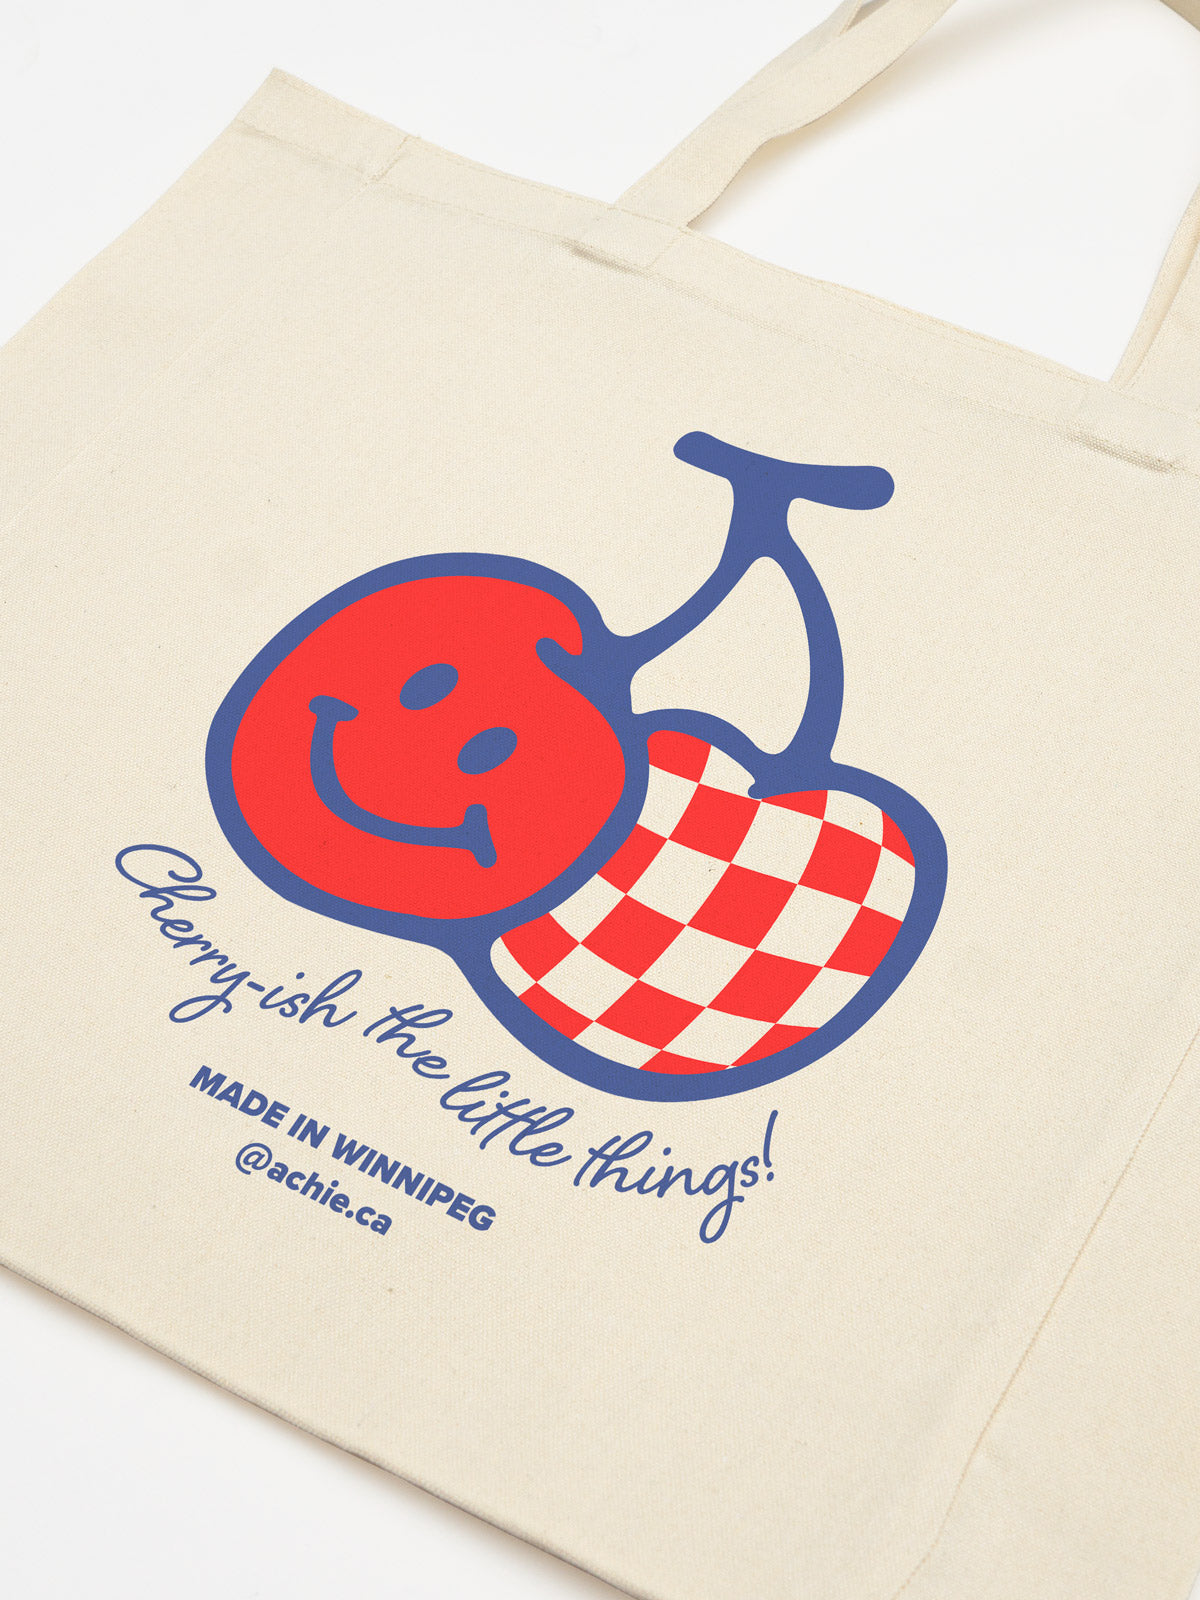 Cherry-ish The Little Things Tote Bag